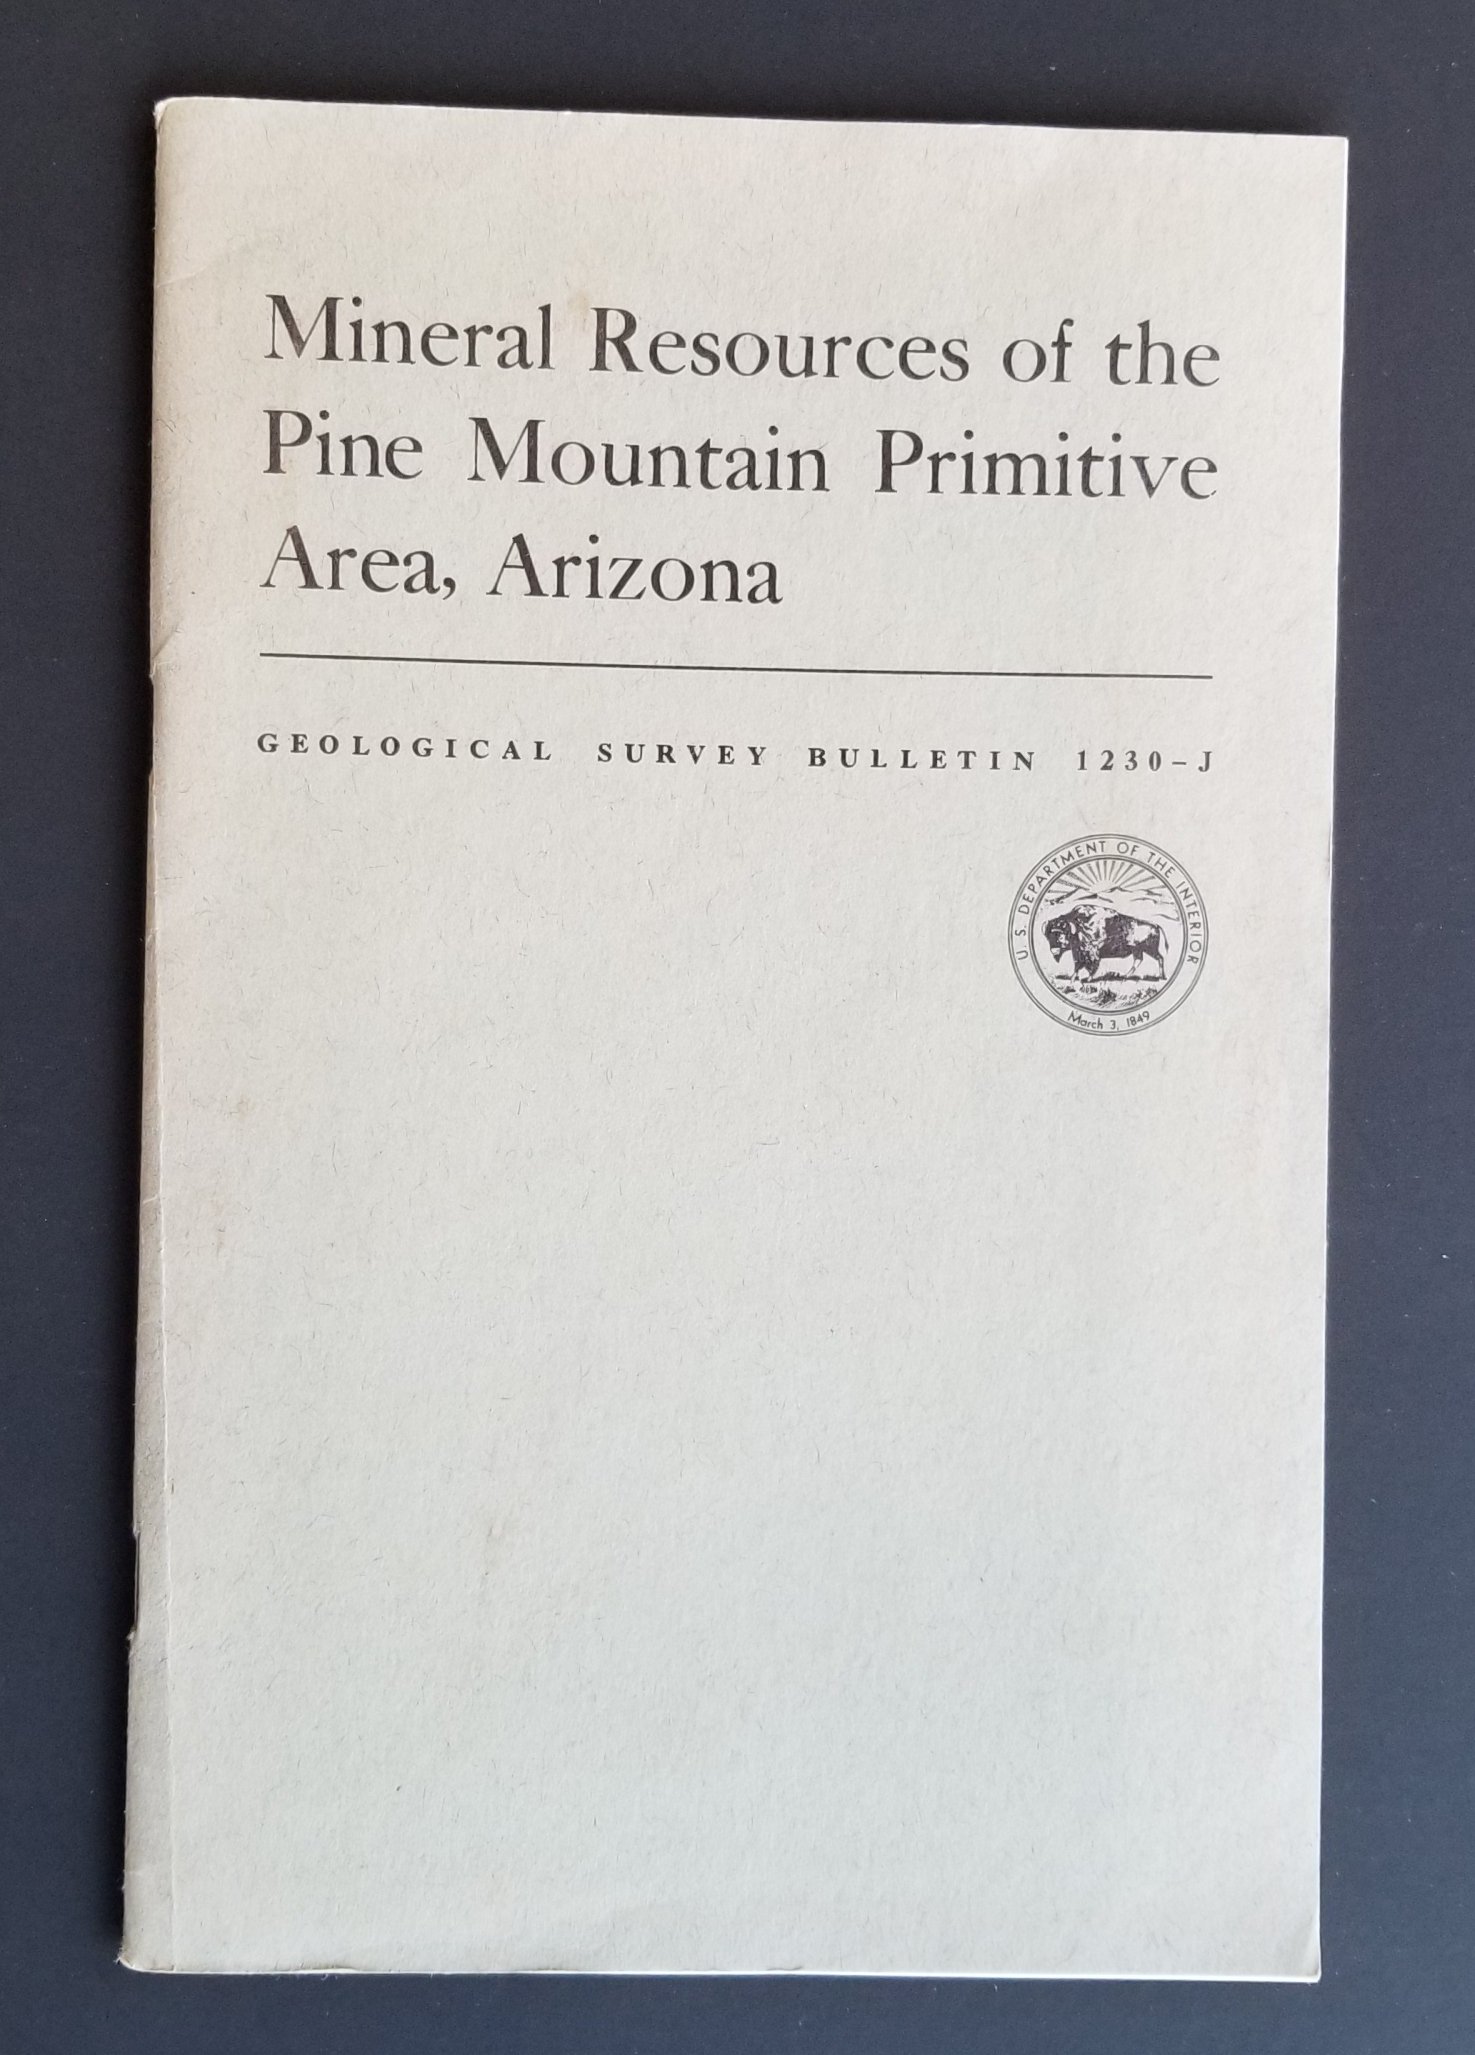 Image for Mineral Resources of the Pine Mountain Primitive Area, Arizona. Studies Related to Wilderness Chapter J.